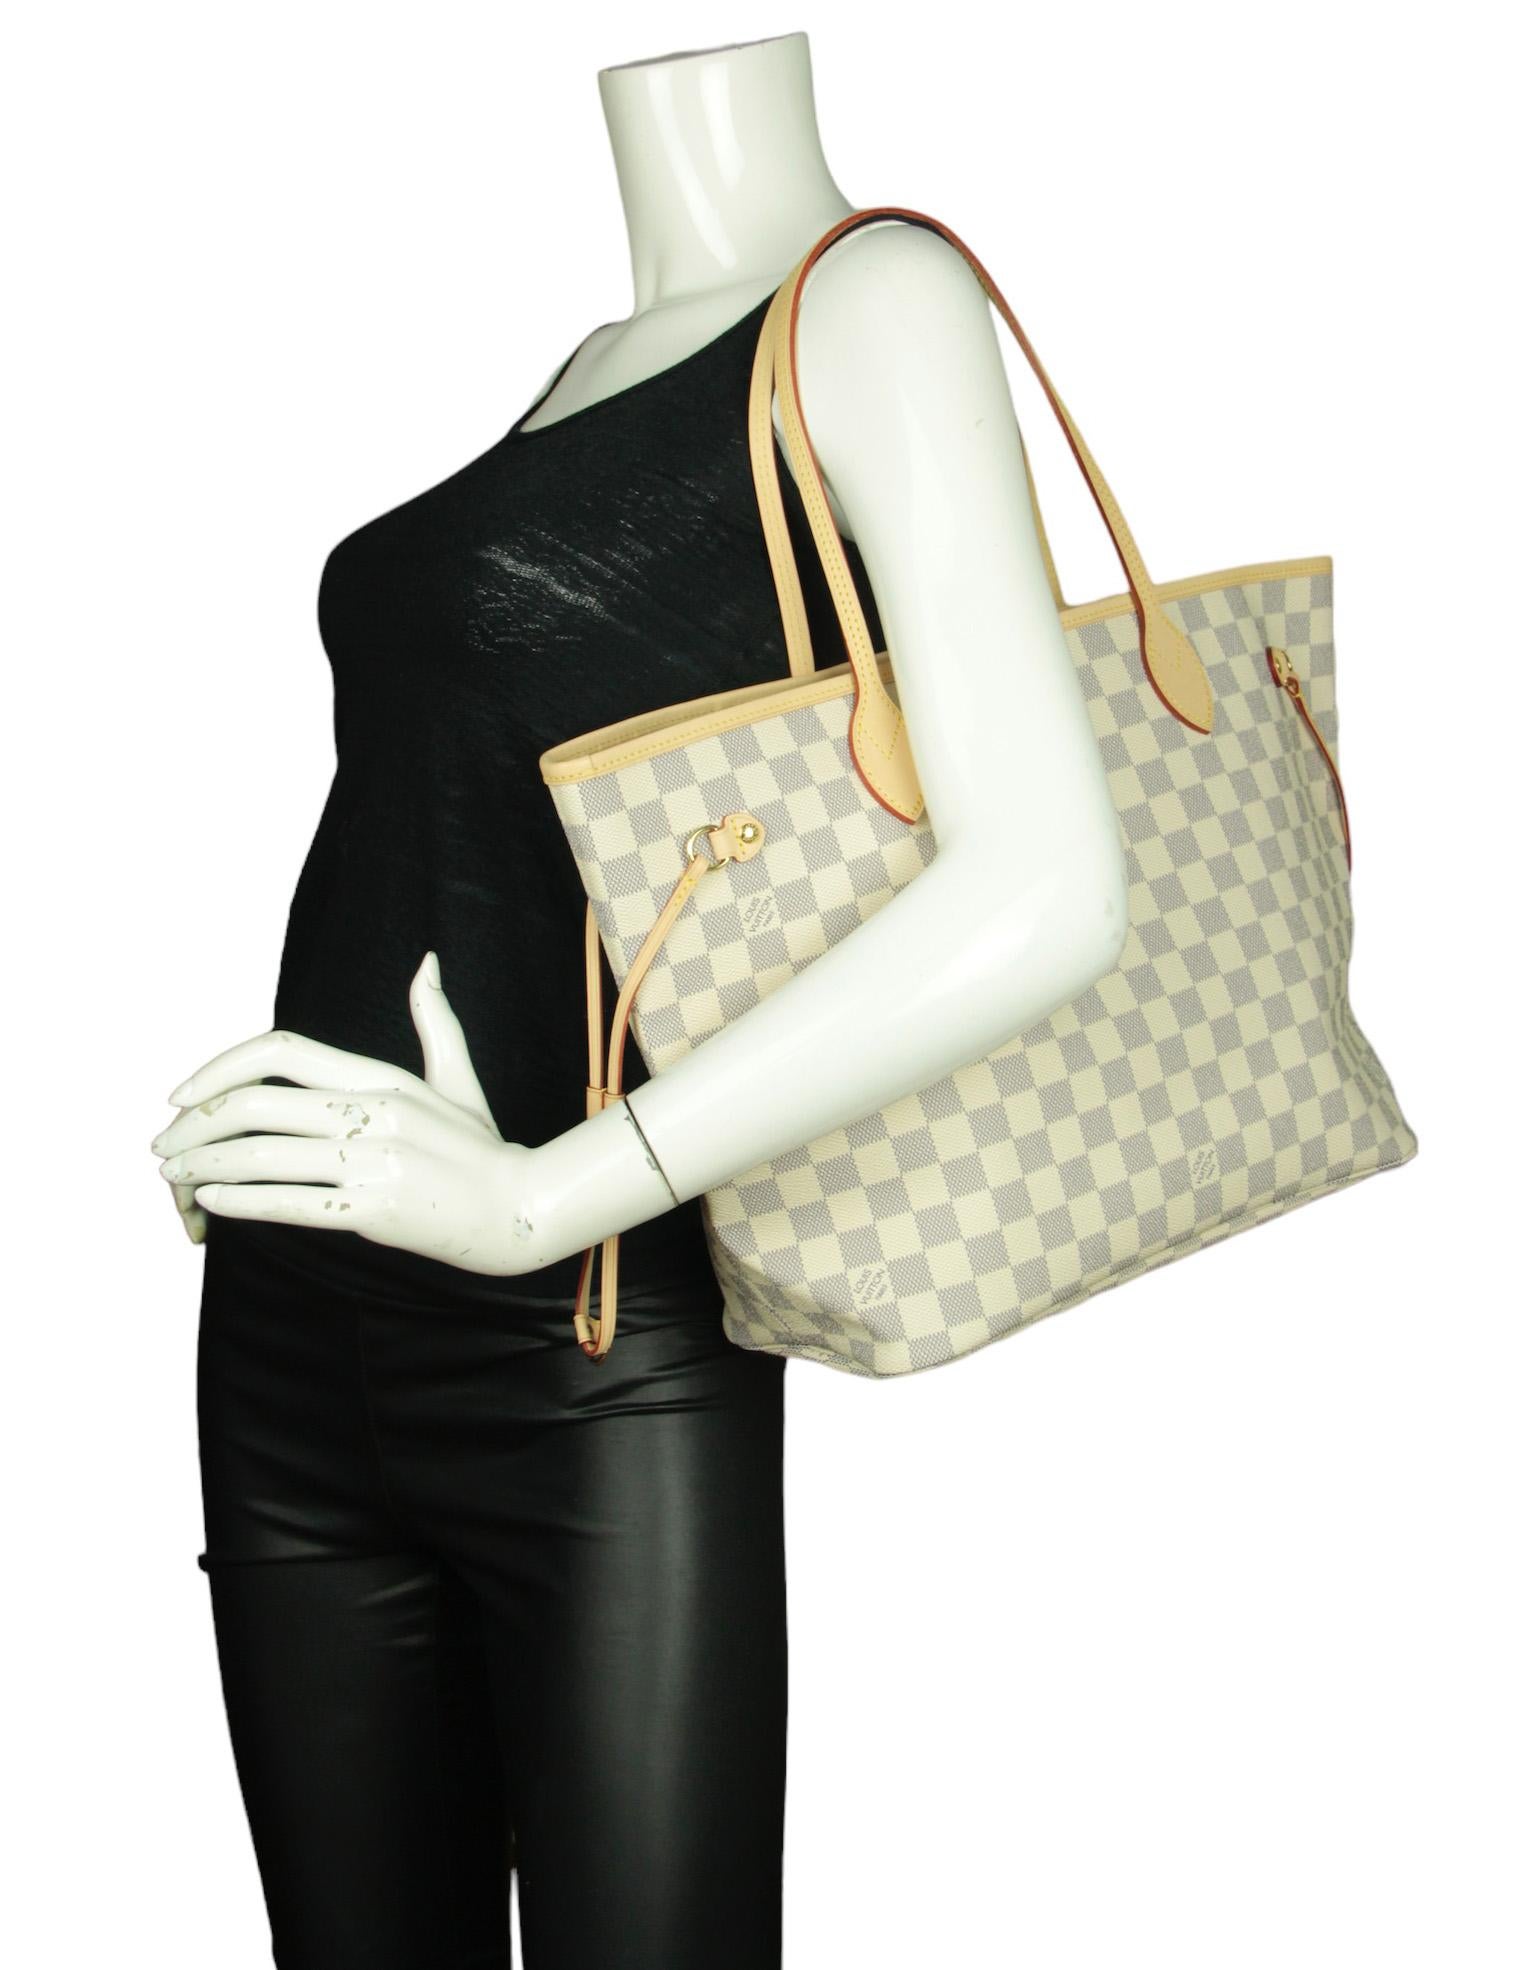 Louis Vuitton Damier Azur Neverfull MM Tote Bag w/ Insert

Color: White, grey
Hardware: Goldtone
Materials: Coated canvas, vachetta leather trim
Lining: Printed canvas
Closure/Opening: Open top with center hook
Exterior Pockets: None
Interior